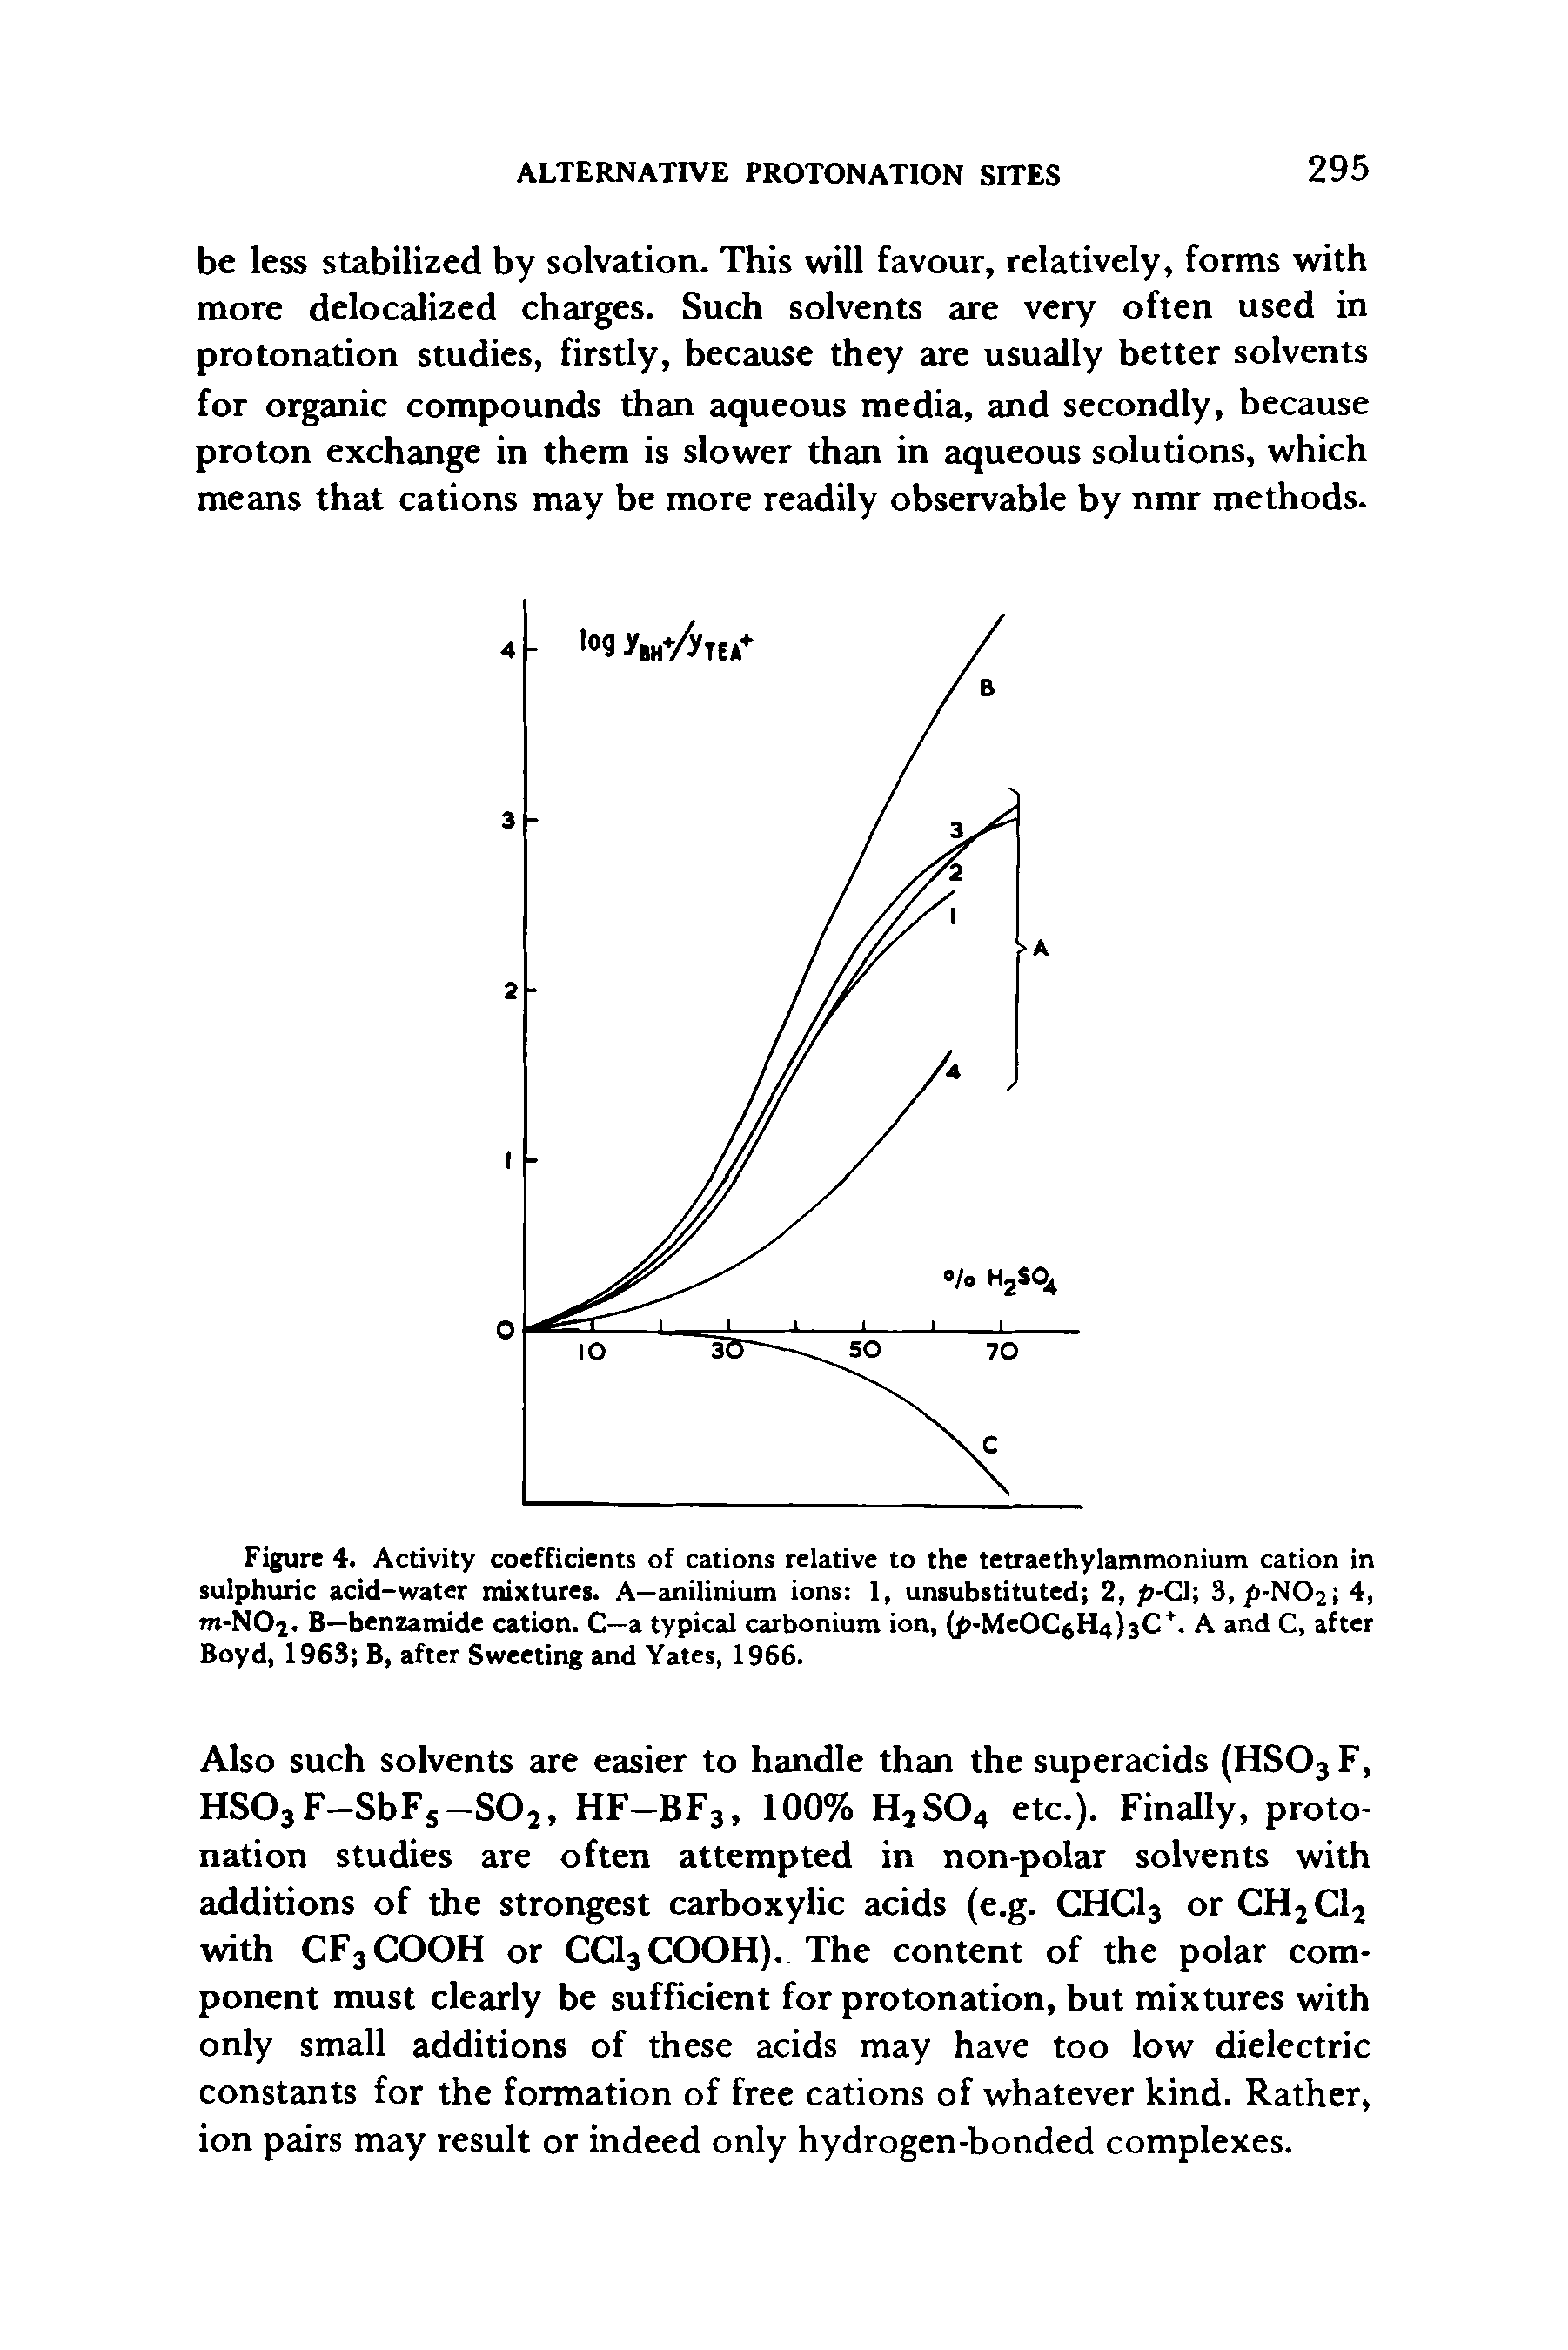 Figure 4. Activity coefficients of cations relative to the tetraethylammonium cation in sulphuric acid-water mixtures. A—anilinium ions 1, unsubstituted 2, J5-C1 3, P-NO2 4, m-N02. B—benzamide cation. C—a typical carbonium ion, (p-MeOCgHajsC. A and C, after Boyd, 1963 B, after Sweeting and Yates, 1966.